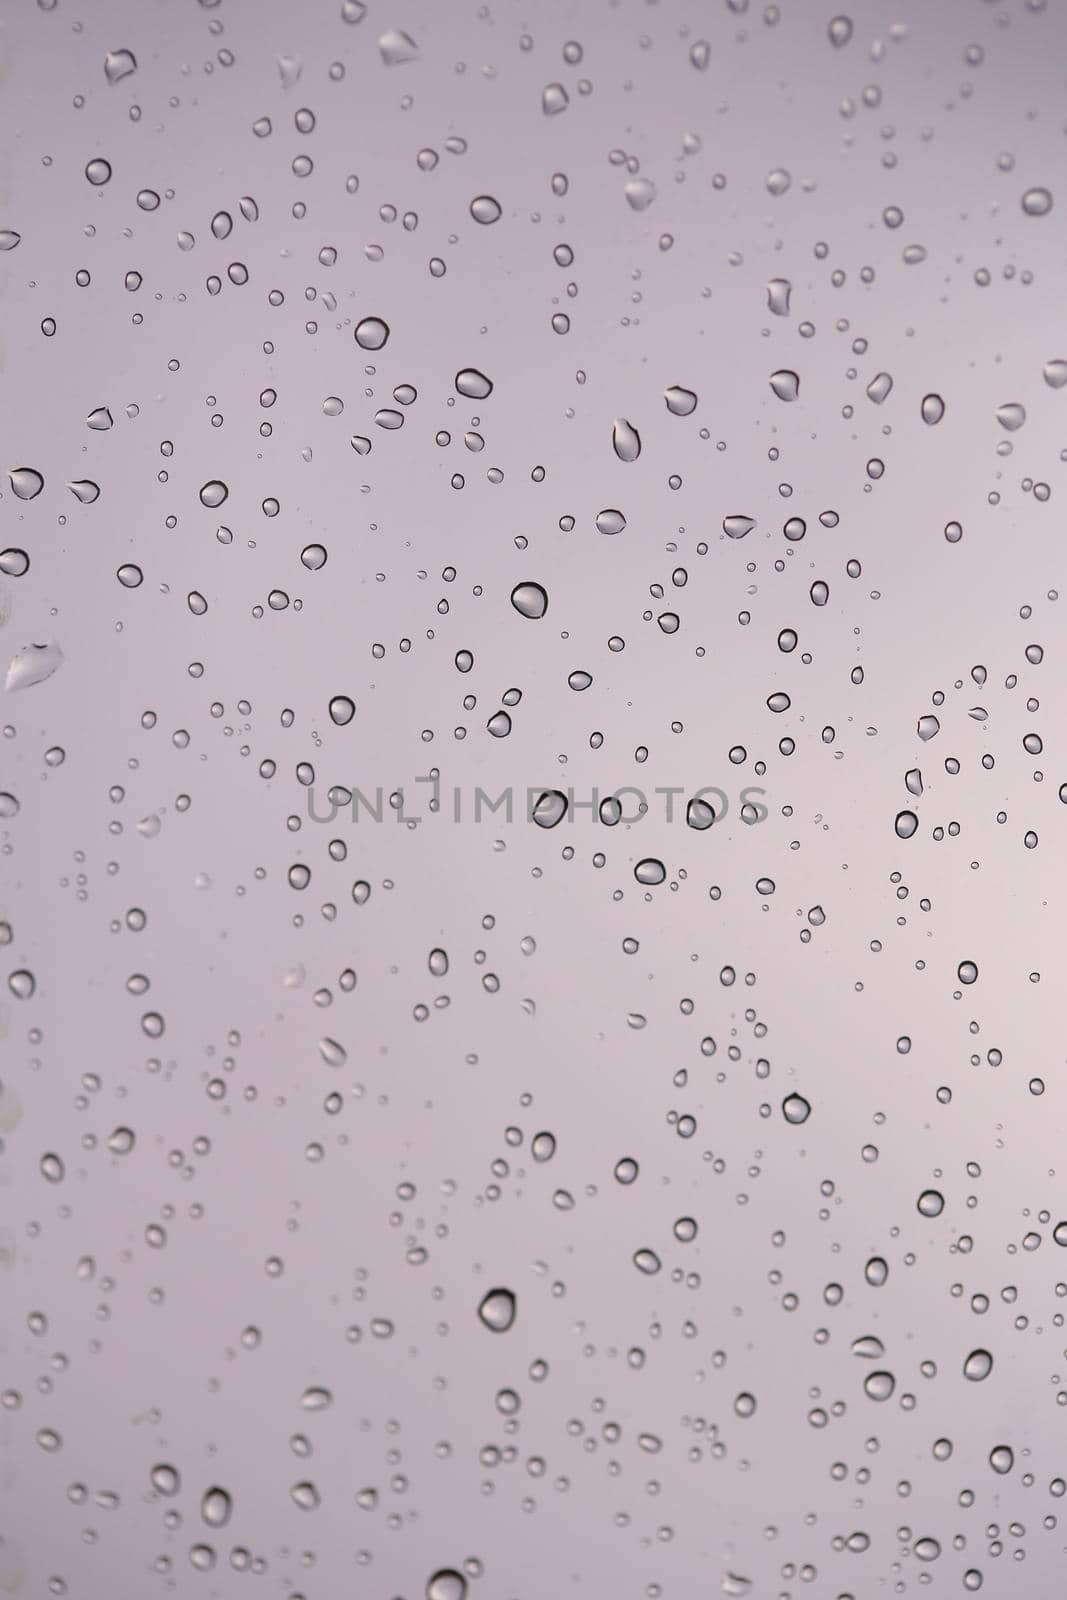 fressh background of water drops on suface